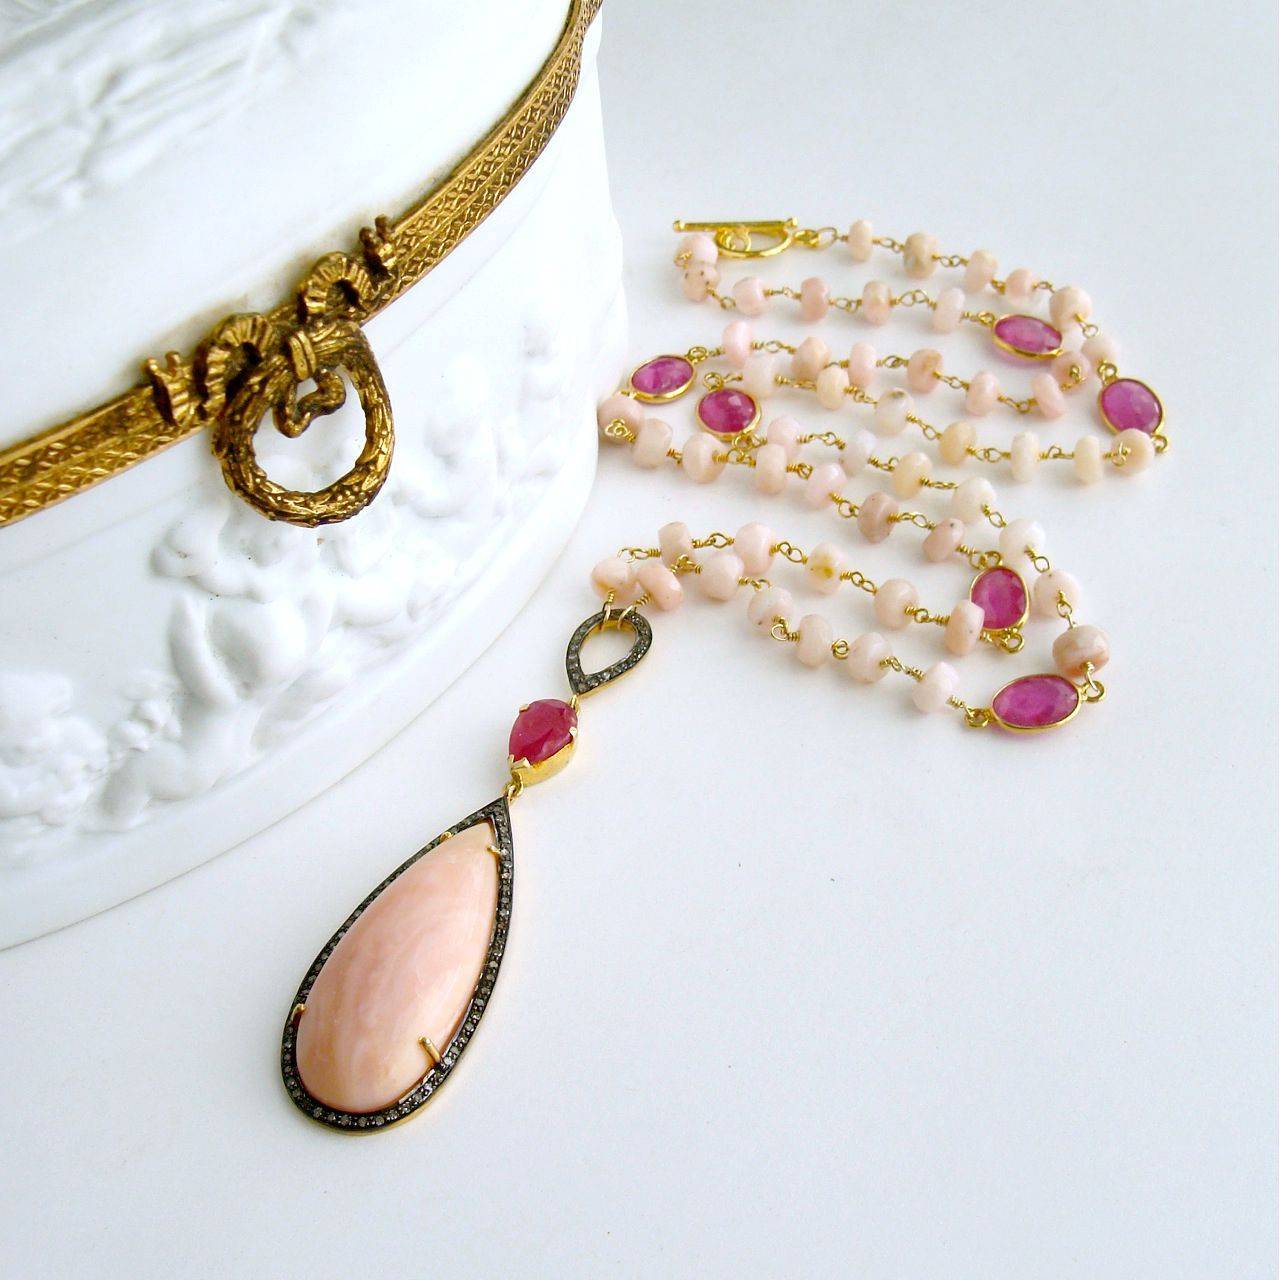 Lisette Necklace.

Ballet pink Peruvian pink opals have been hand linked in gold vermeil and intercepted with bezel set pink sapphire connectors to create this ultra feminine layering necklace.  A striking teardrop pendant of Peruvian pink opal